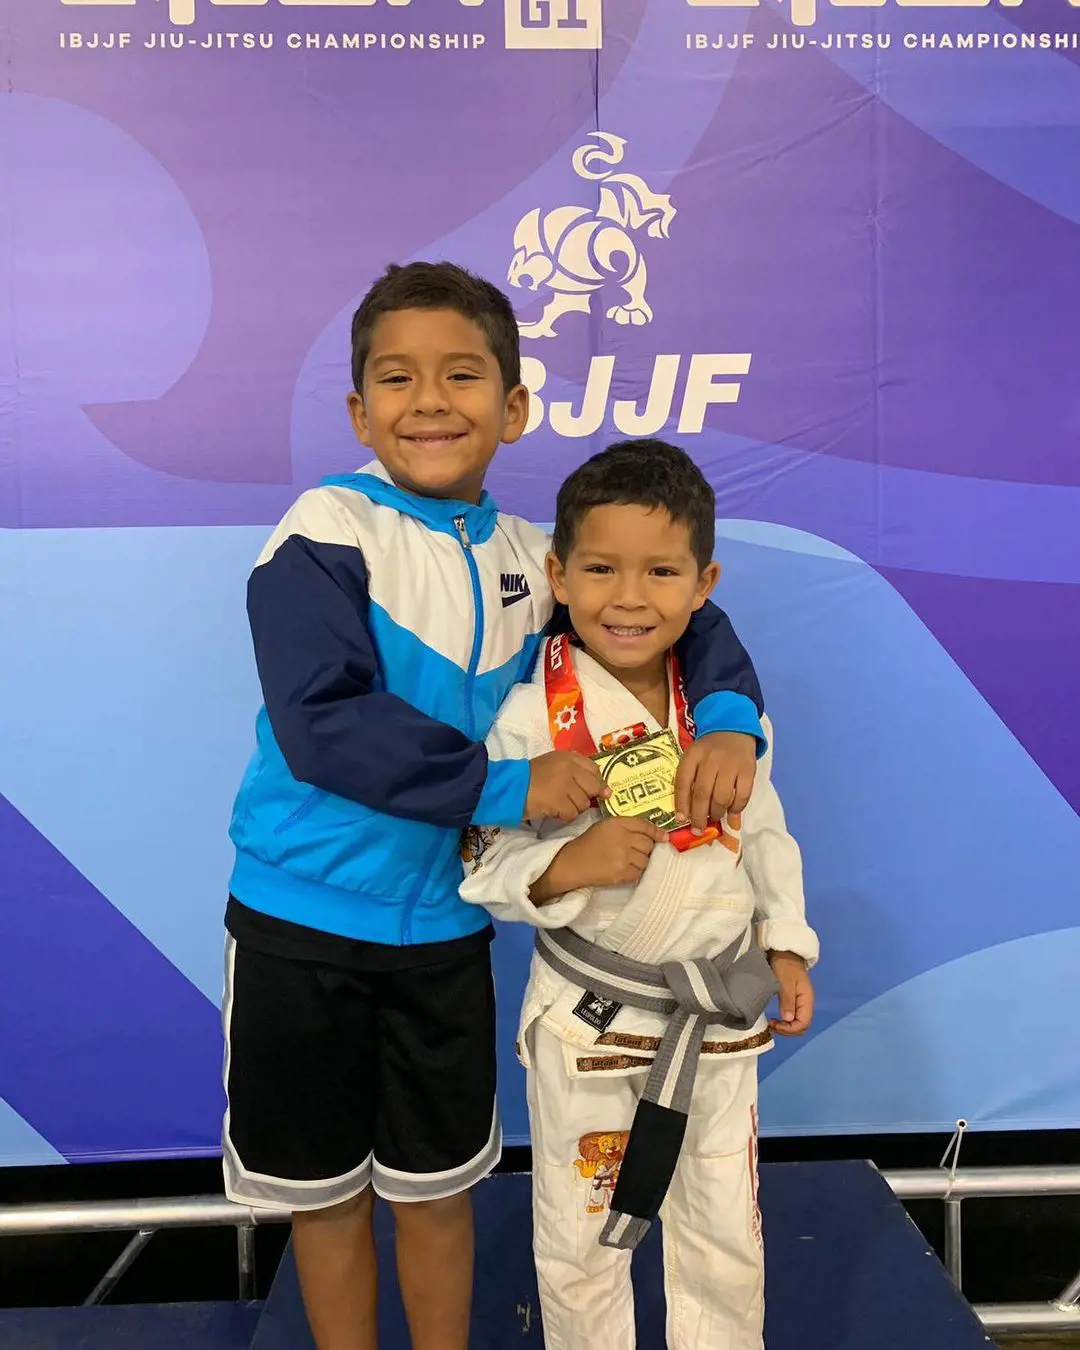 Joshua(right) shows his gold medal as he poses with his brother Pedro